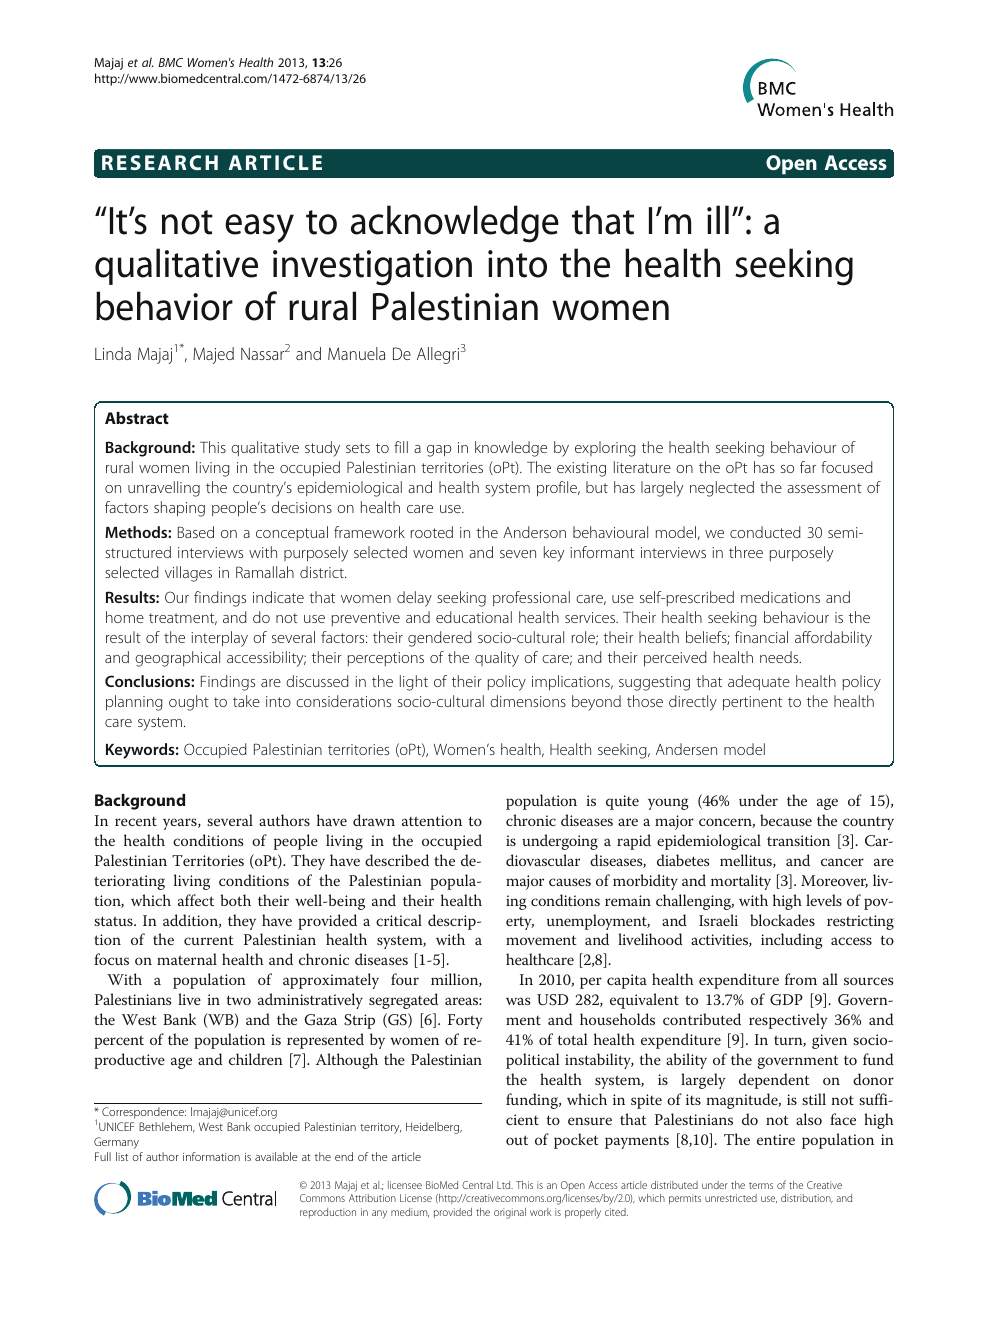 It's not to acknowledge that I'm ill”: a qualitative investigation into the health seeking behavior rural Palestinian women – of research paper in Health sciences. Download scholarly article PDF